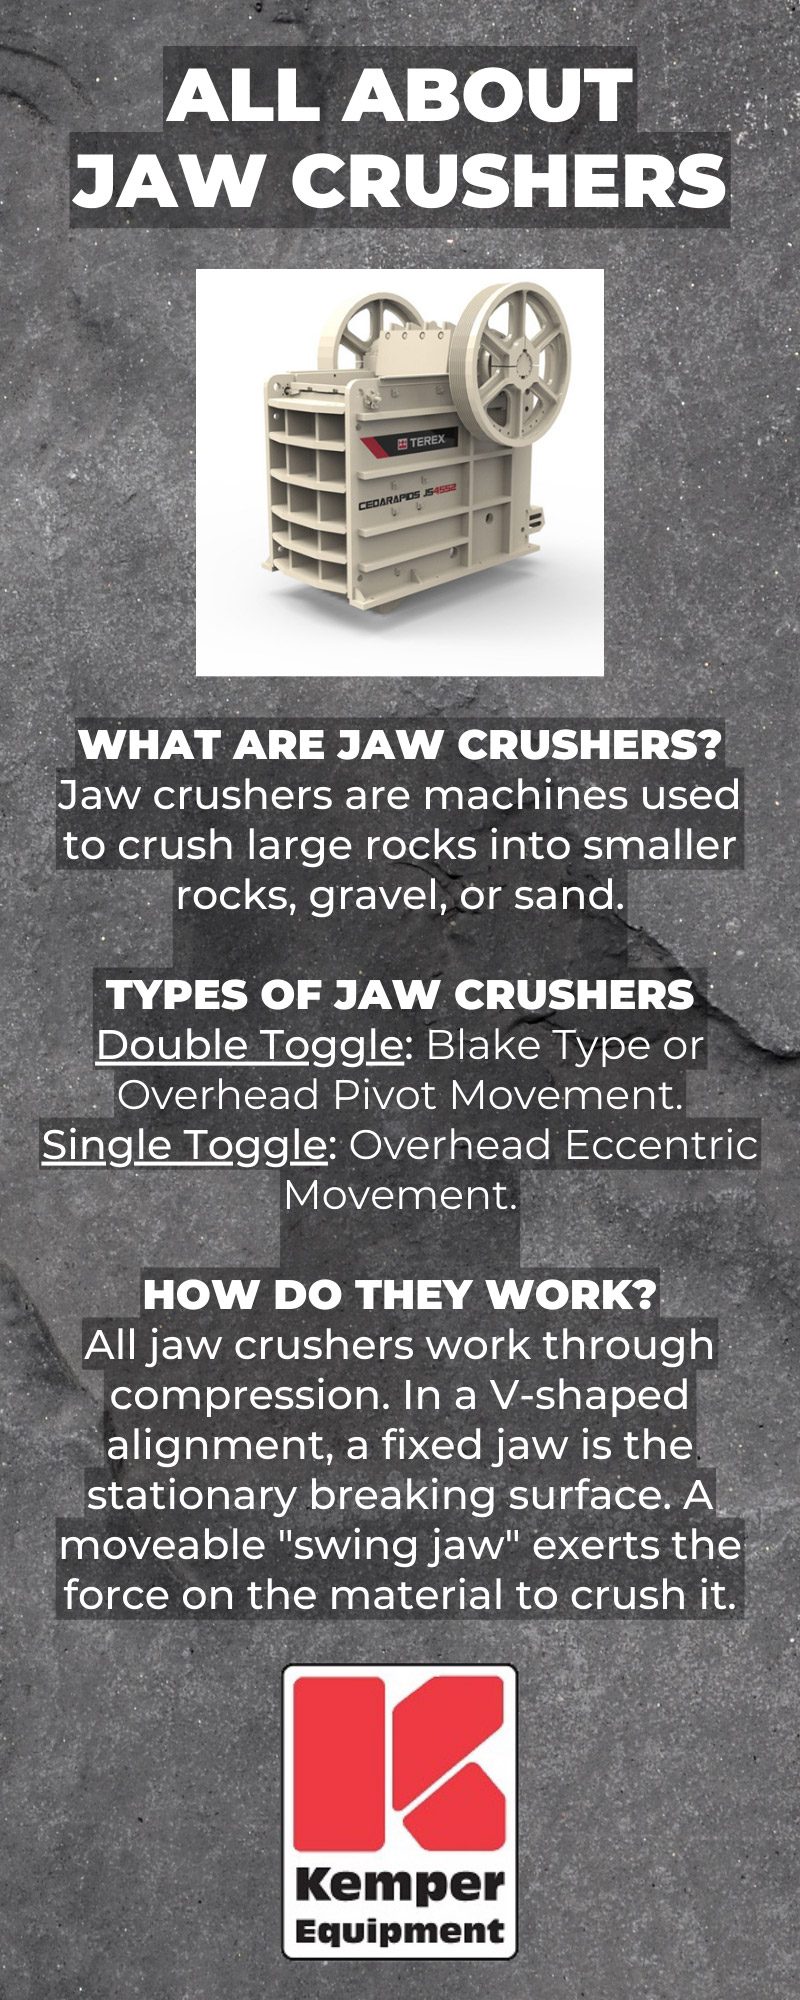 An infographic about jaw crushers.